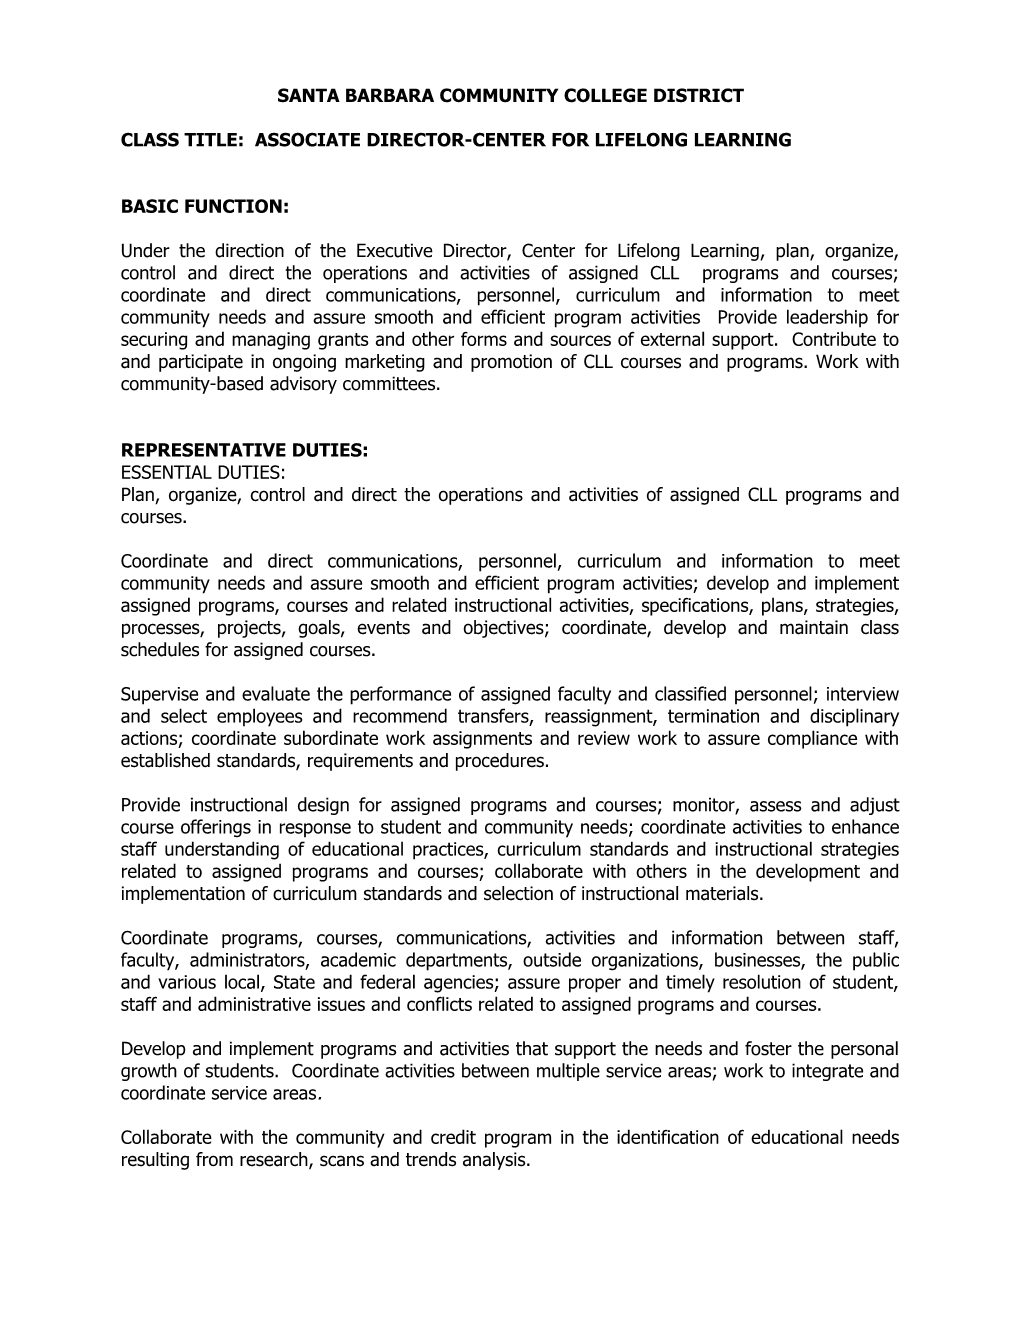 Associate Director-Center for Lifelong Learning - Continuedpage 1